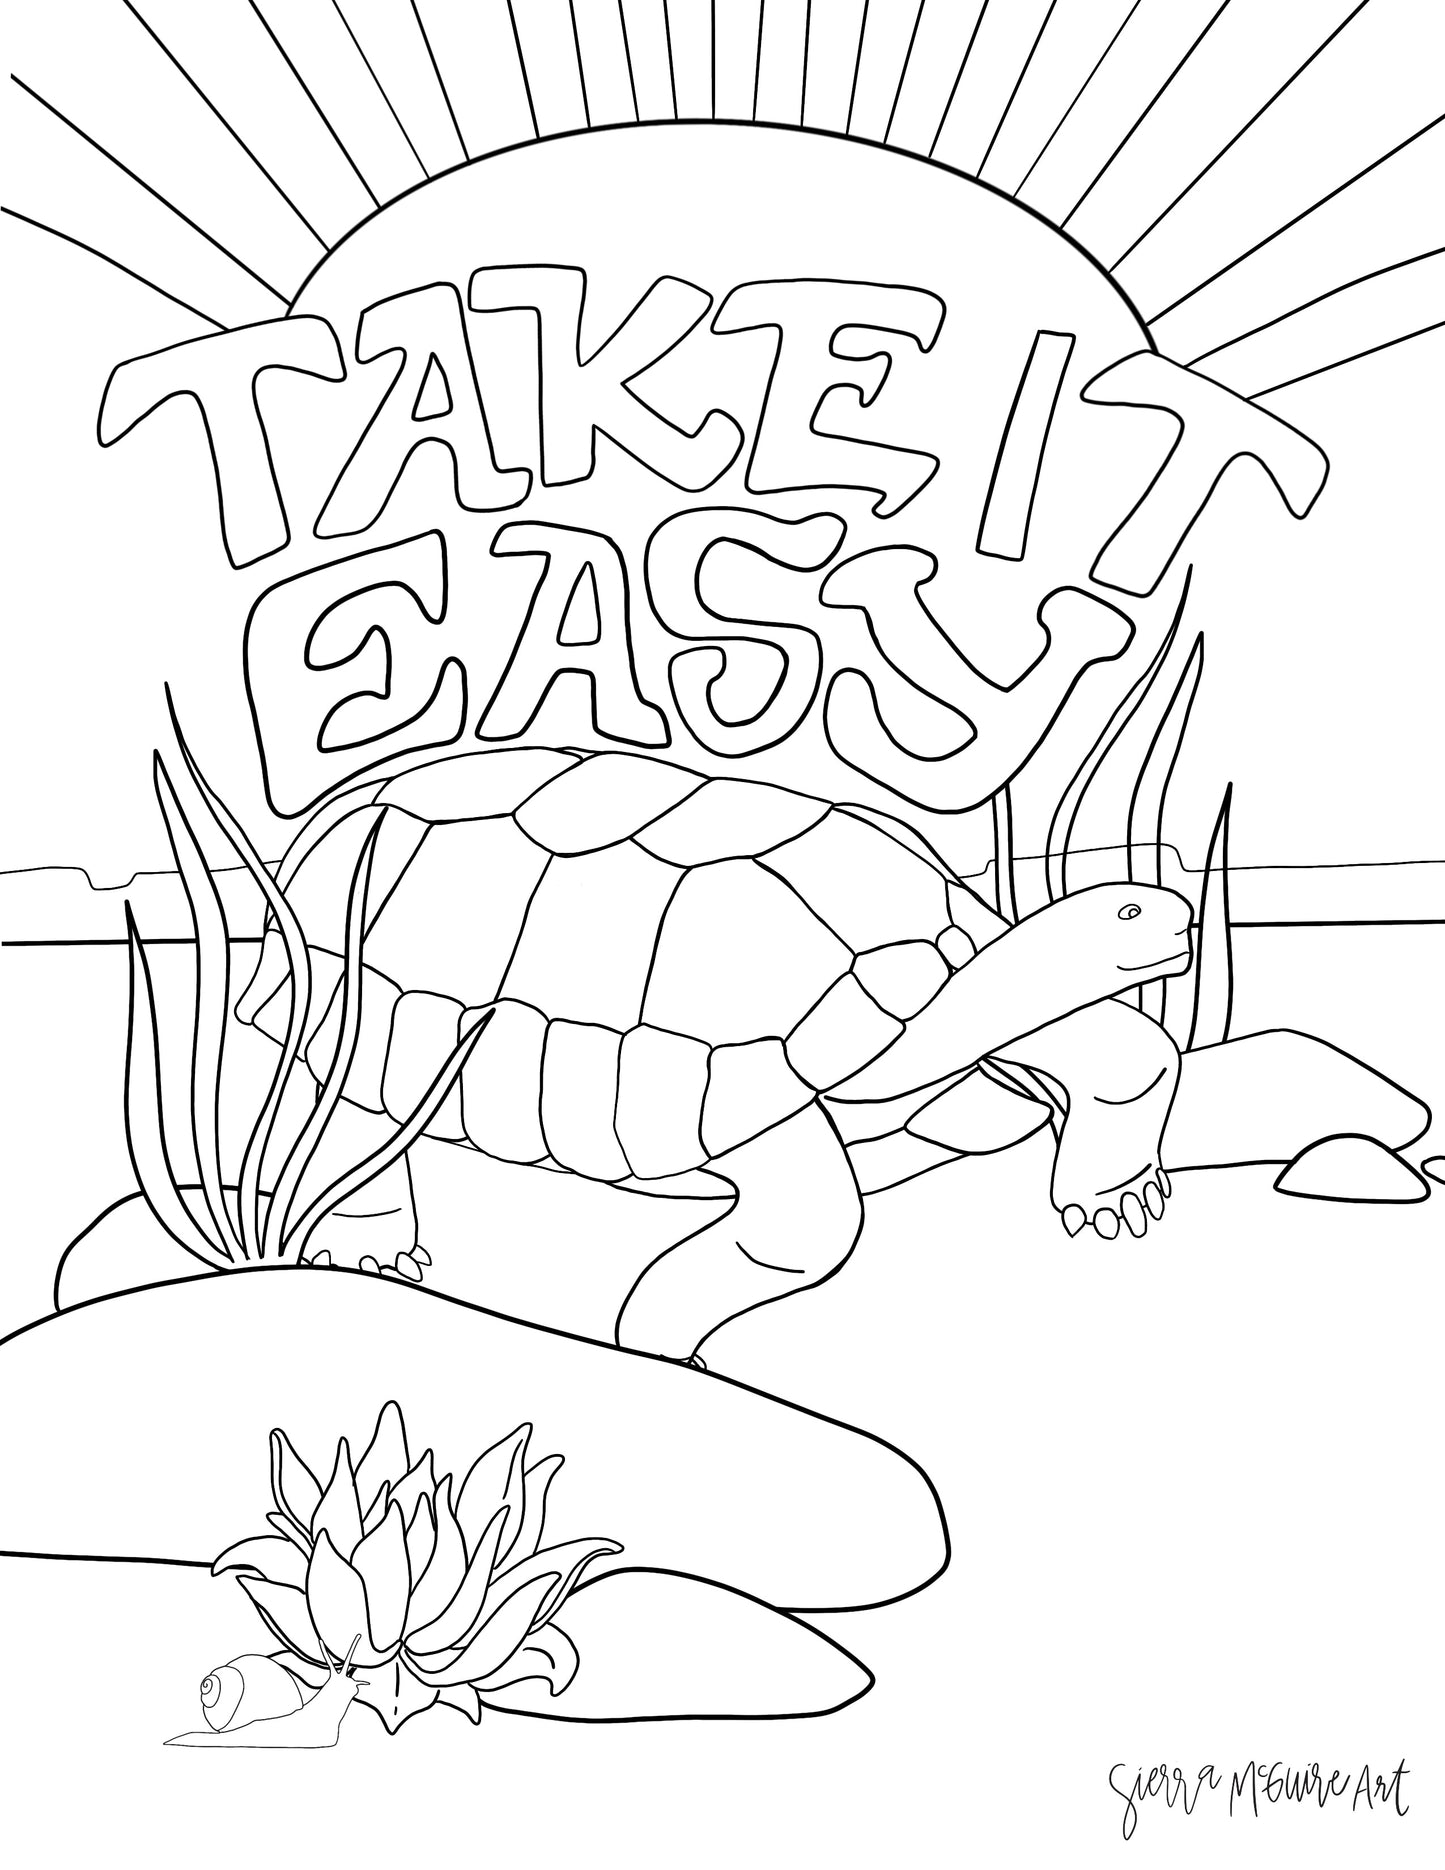 Take It Easy Coloring Page